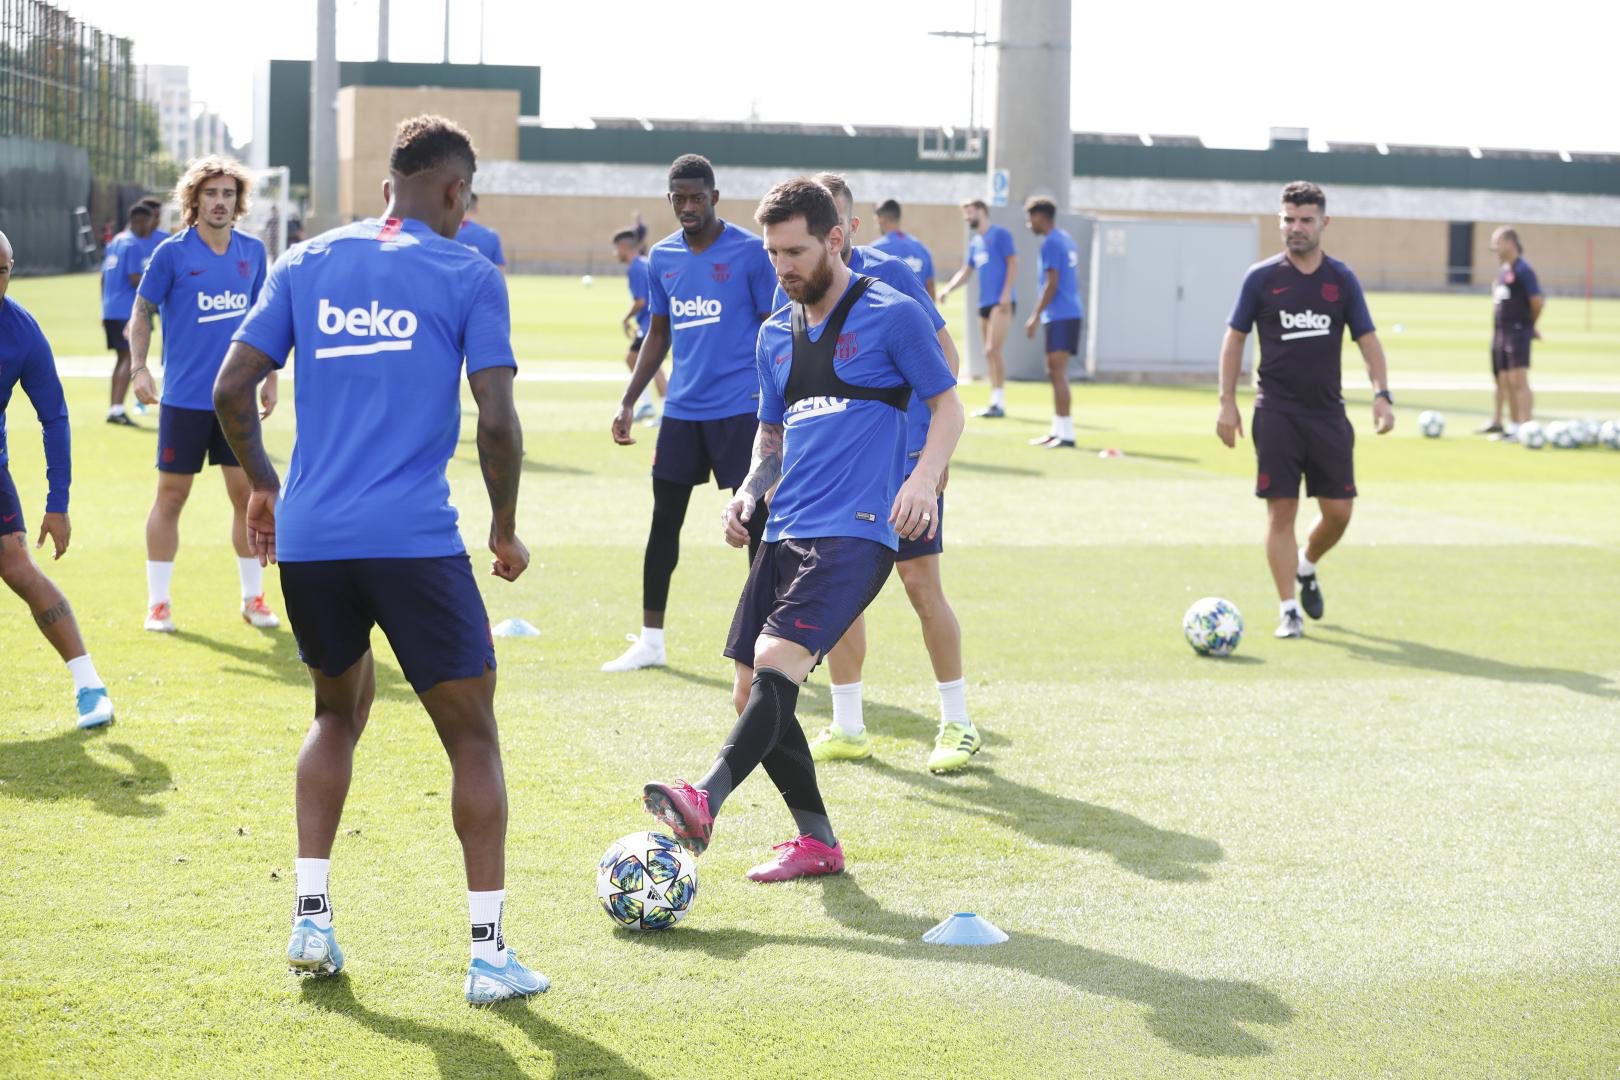 Lionel Messi back in Barcelona training ahead of Dortmund CL game